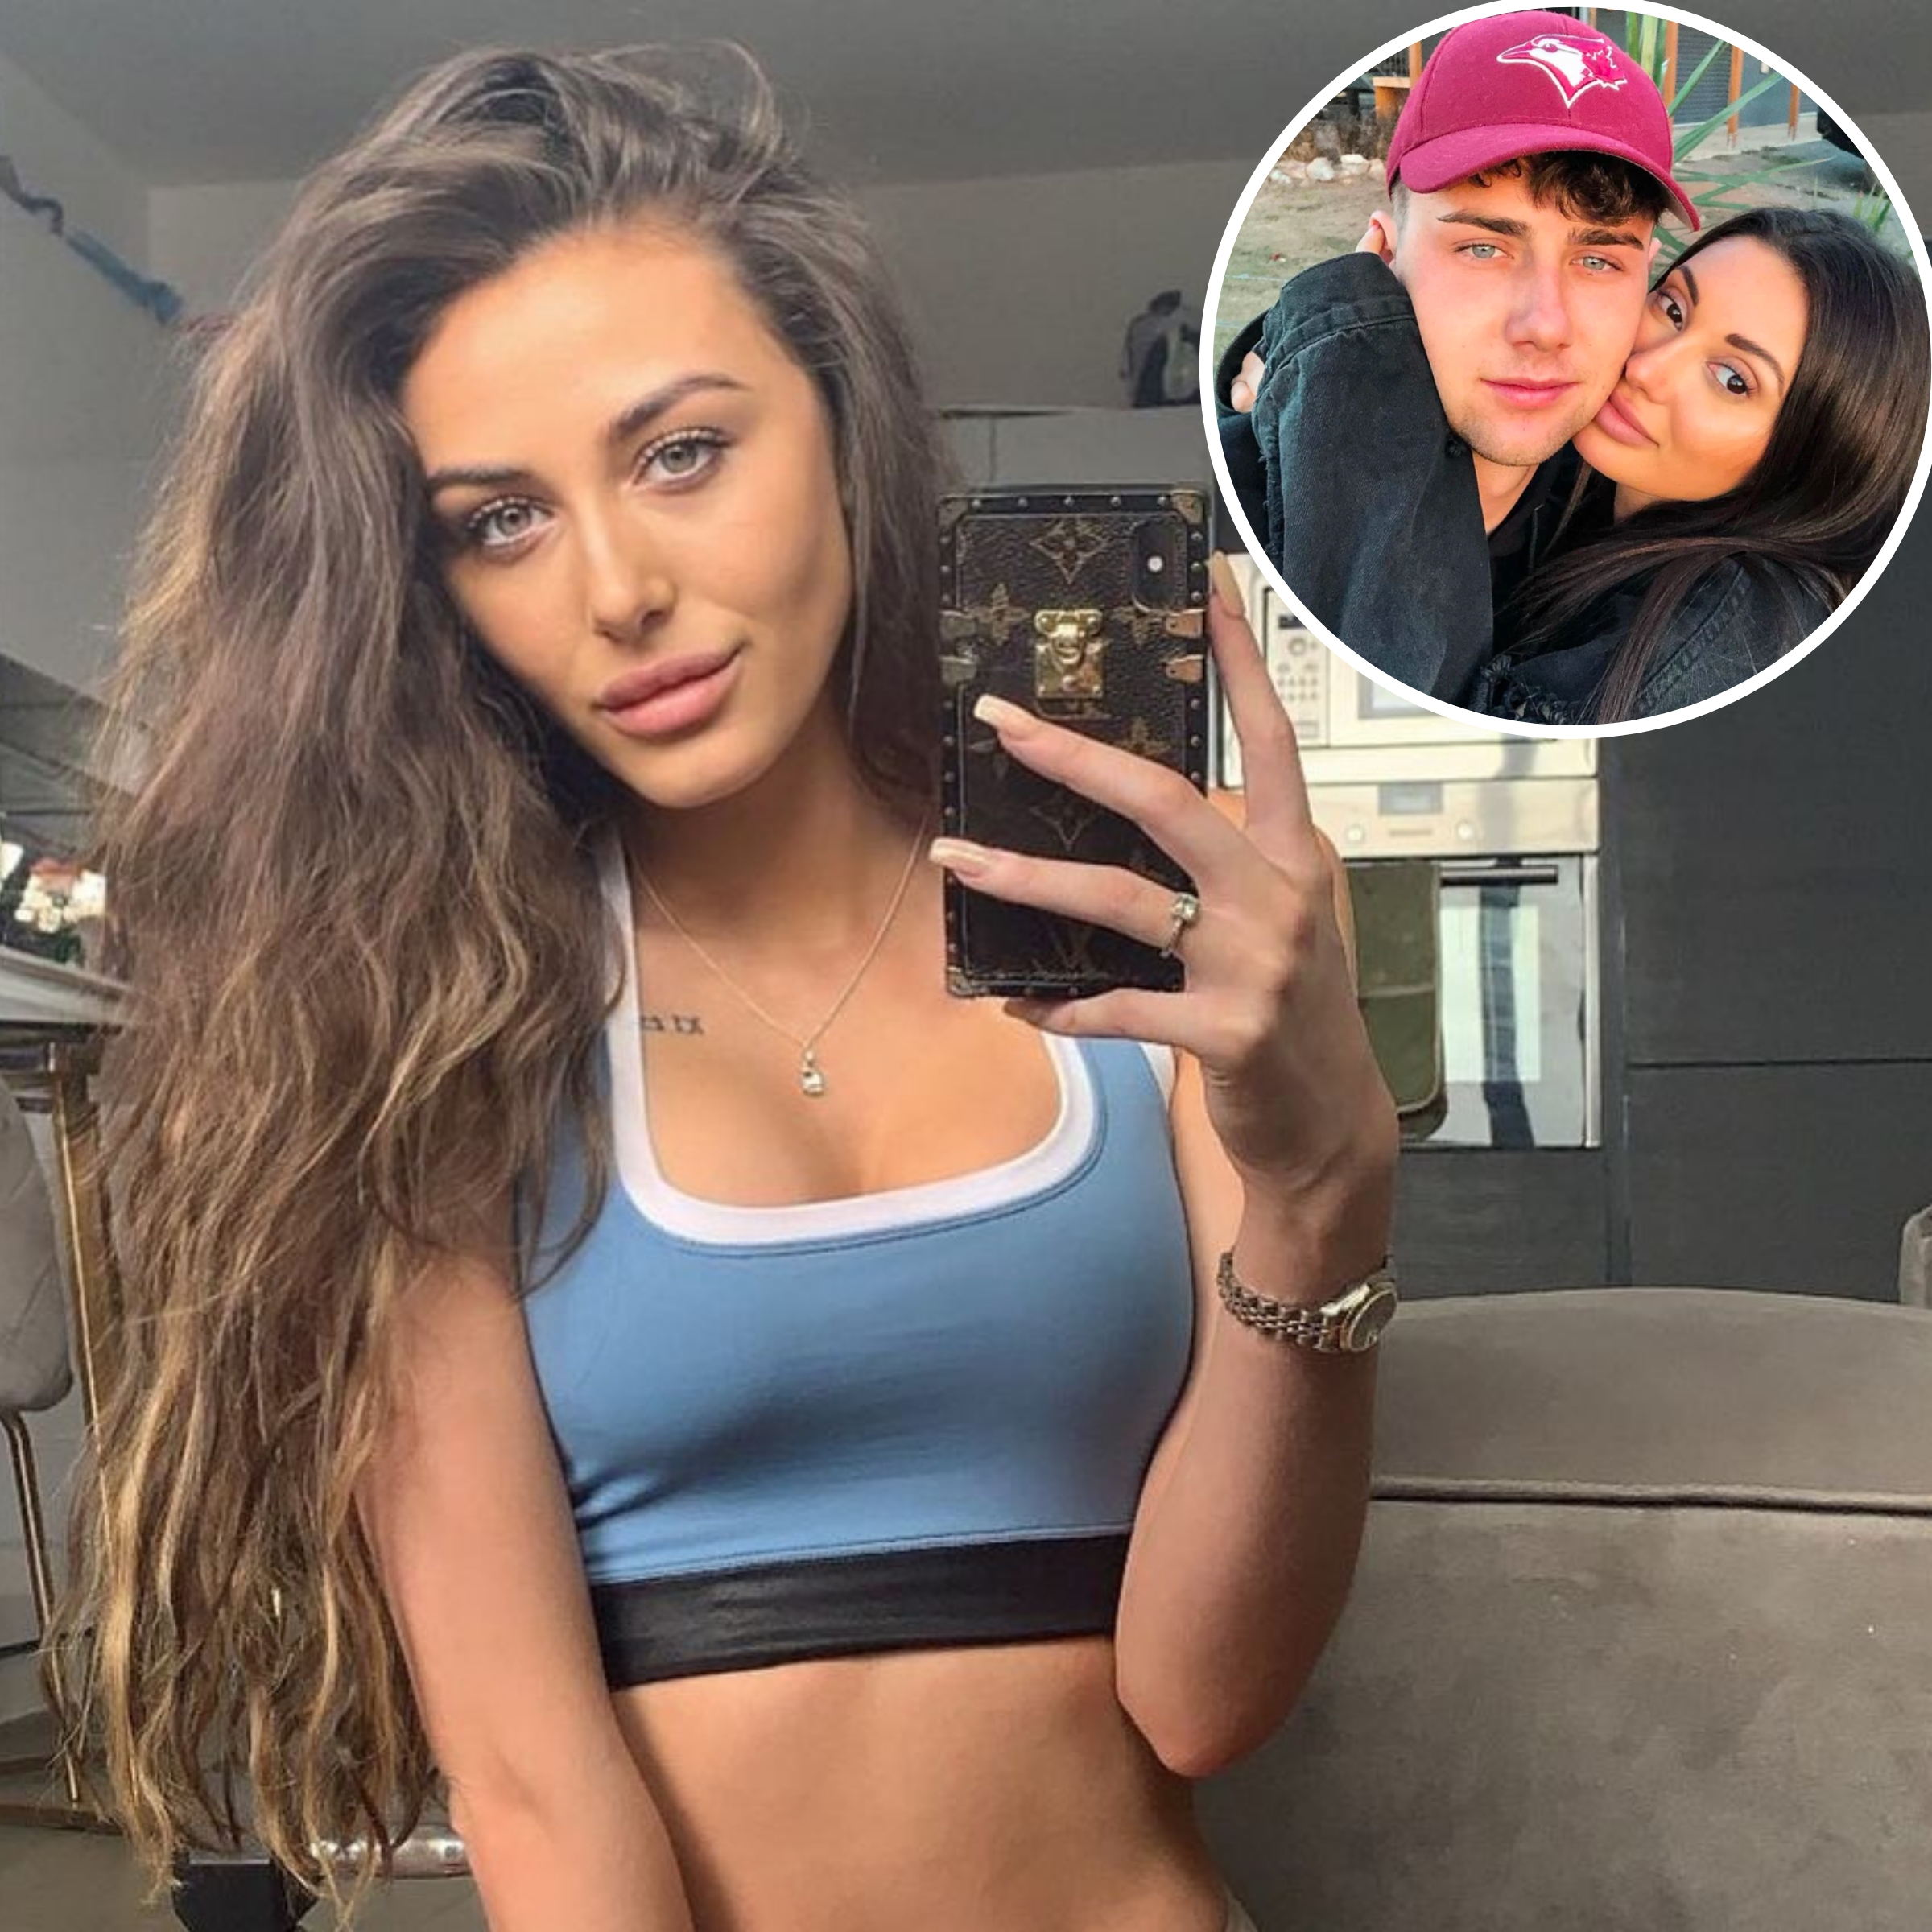 Who Is Chloe Veitch Dating? 'The Circle' Star Is 'Unlucky' in Love